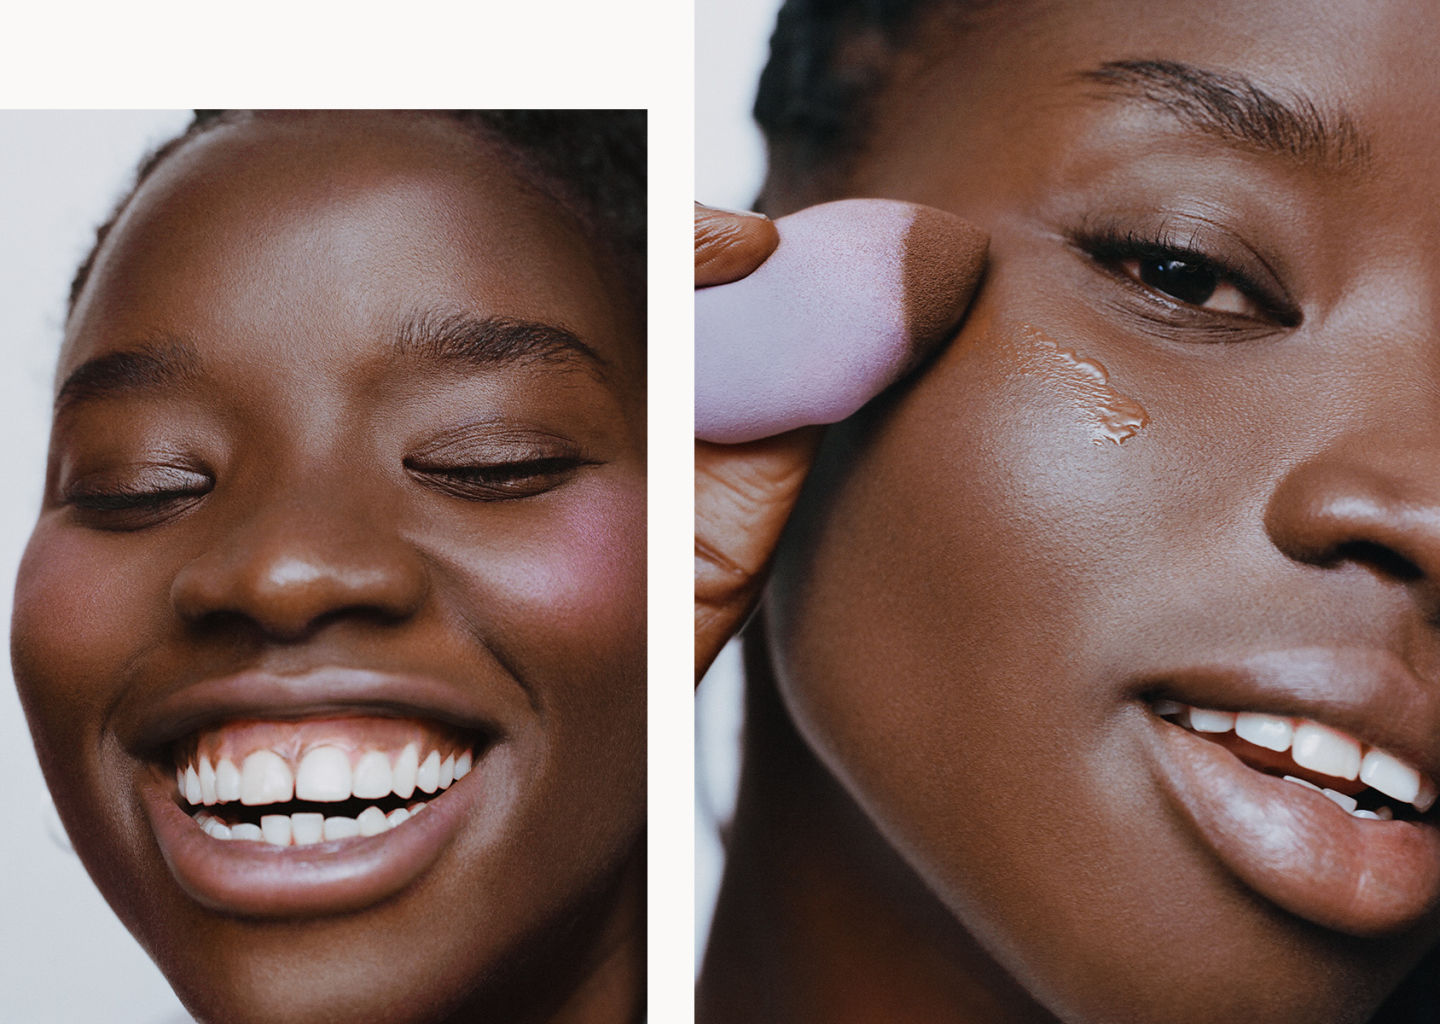 Three beauty hacks to get the perfect base